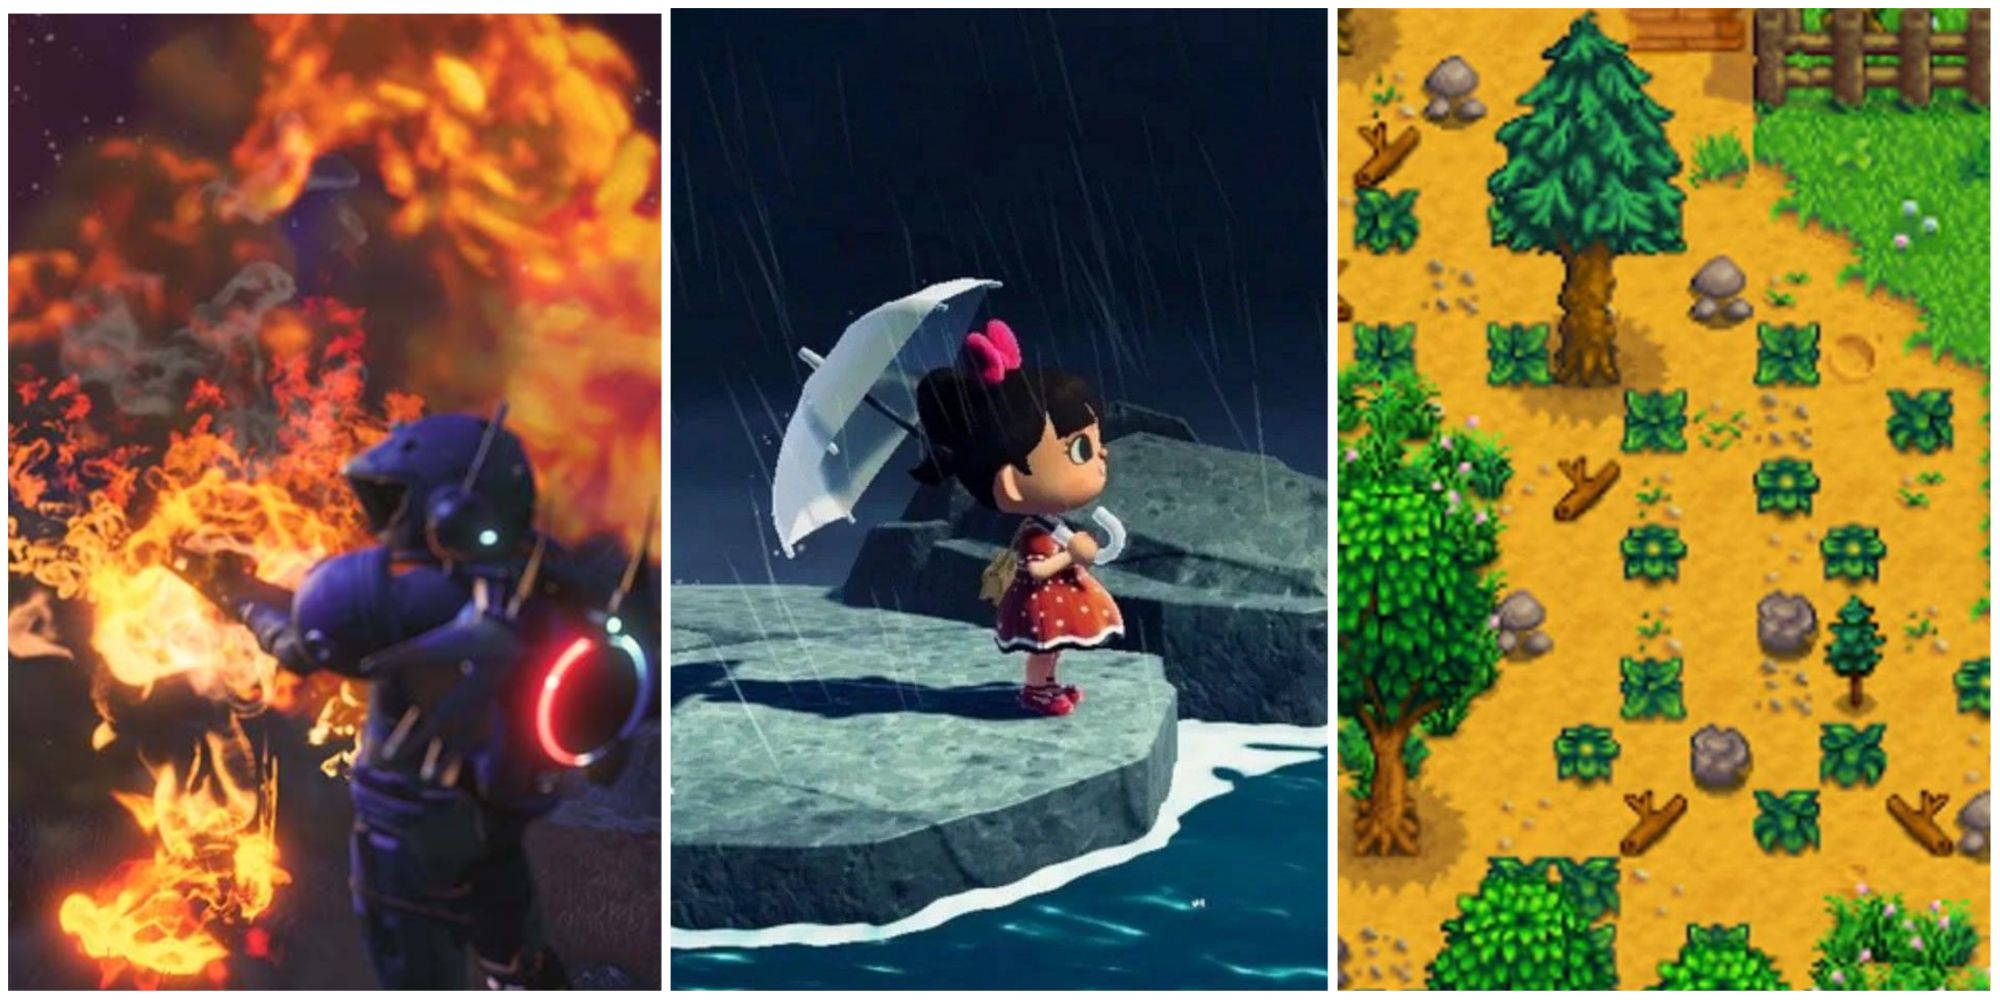 Split Image Of Fire In No Man's Sky, A Player In The Rain In Animal Crossing, And An Overgrown Farm In Stardew Valley